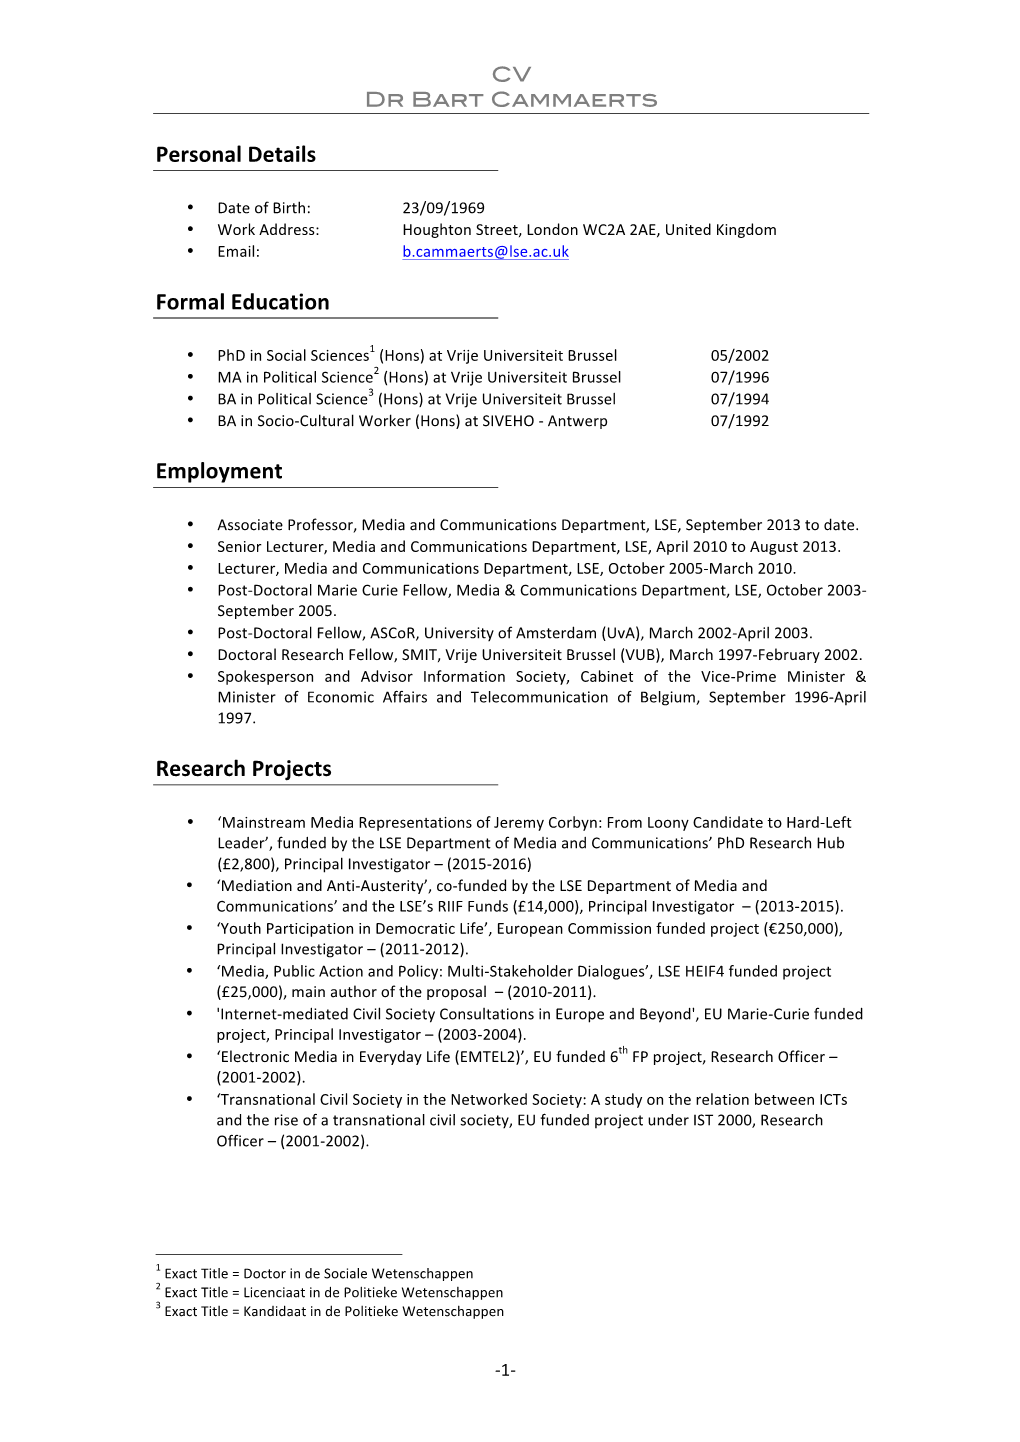 Personal Details Formal Education Employment Research Projects